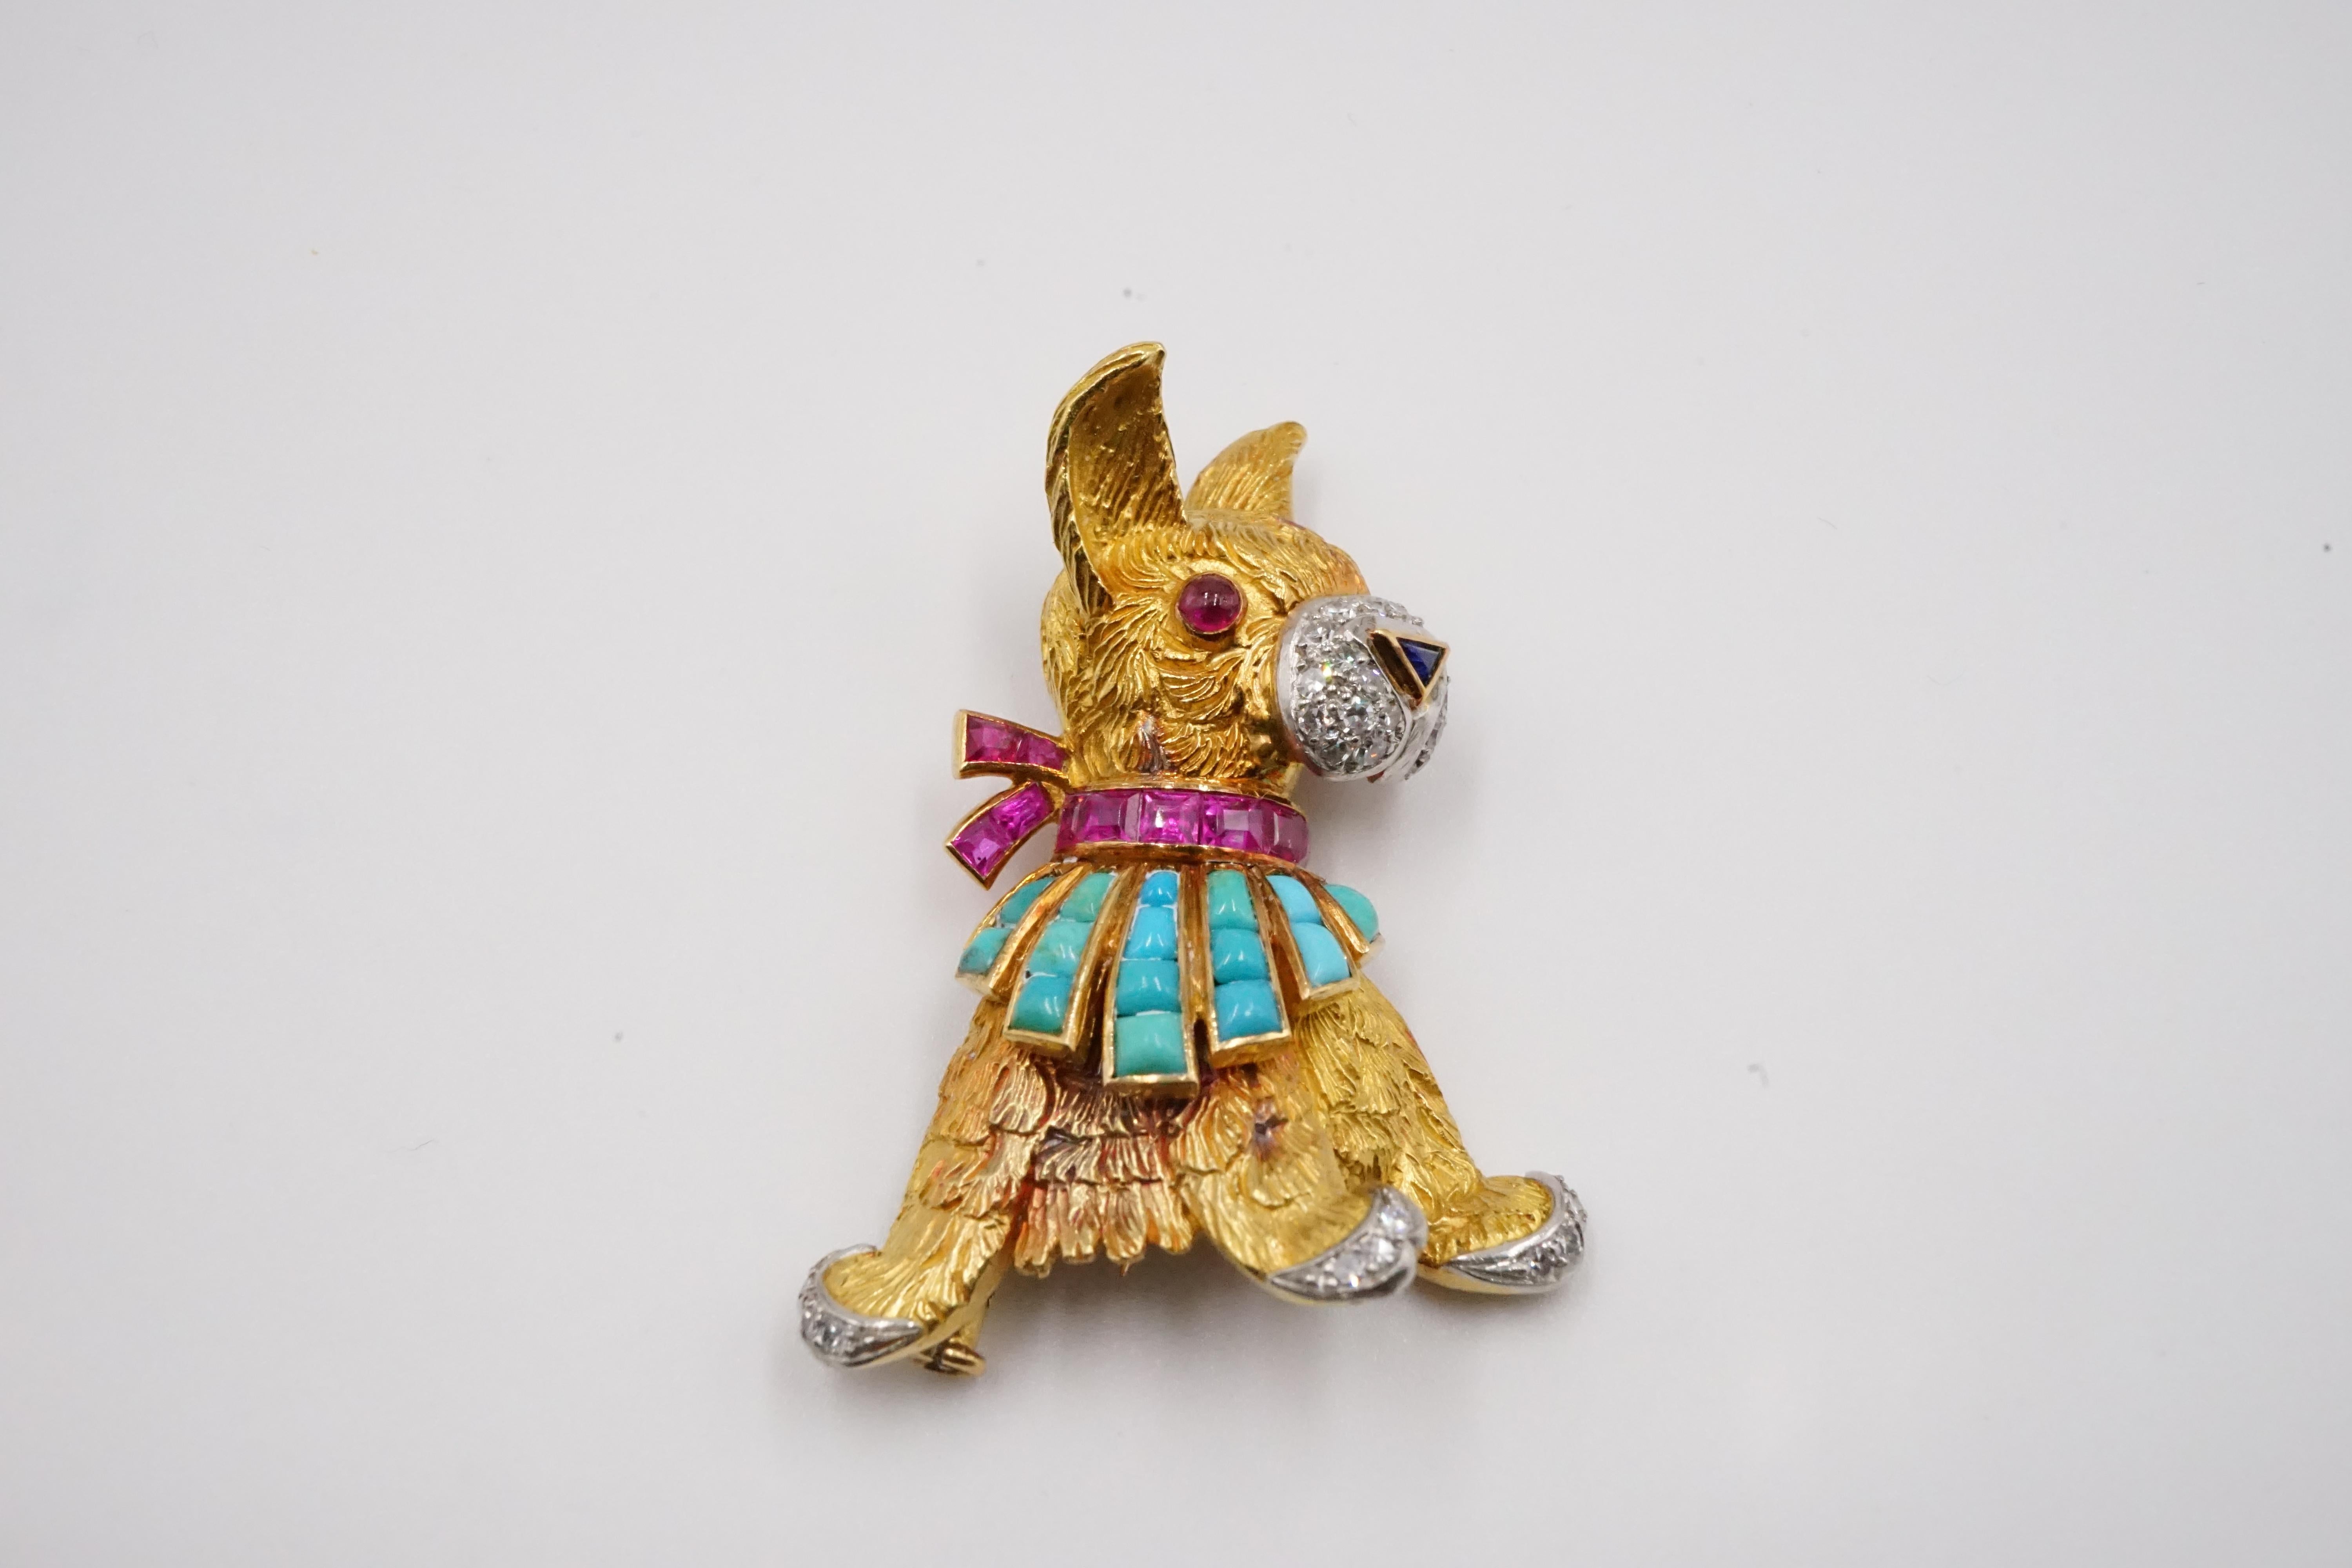 Two adorable 18K yellow gold Boucheron animal brooches - a hare and a puppy.

The hare measures W:2.8cm H: 4.9cm D: 1.0cm Weight:14.4g, sapphire eyes ruby nose and a turquoise collar. The hare stands with 2 feet and turned its head to the left  and